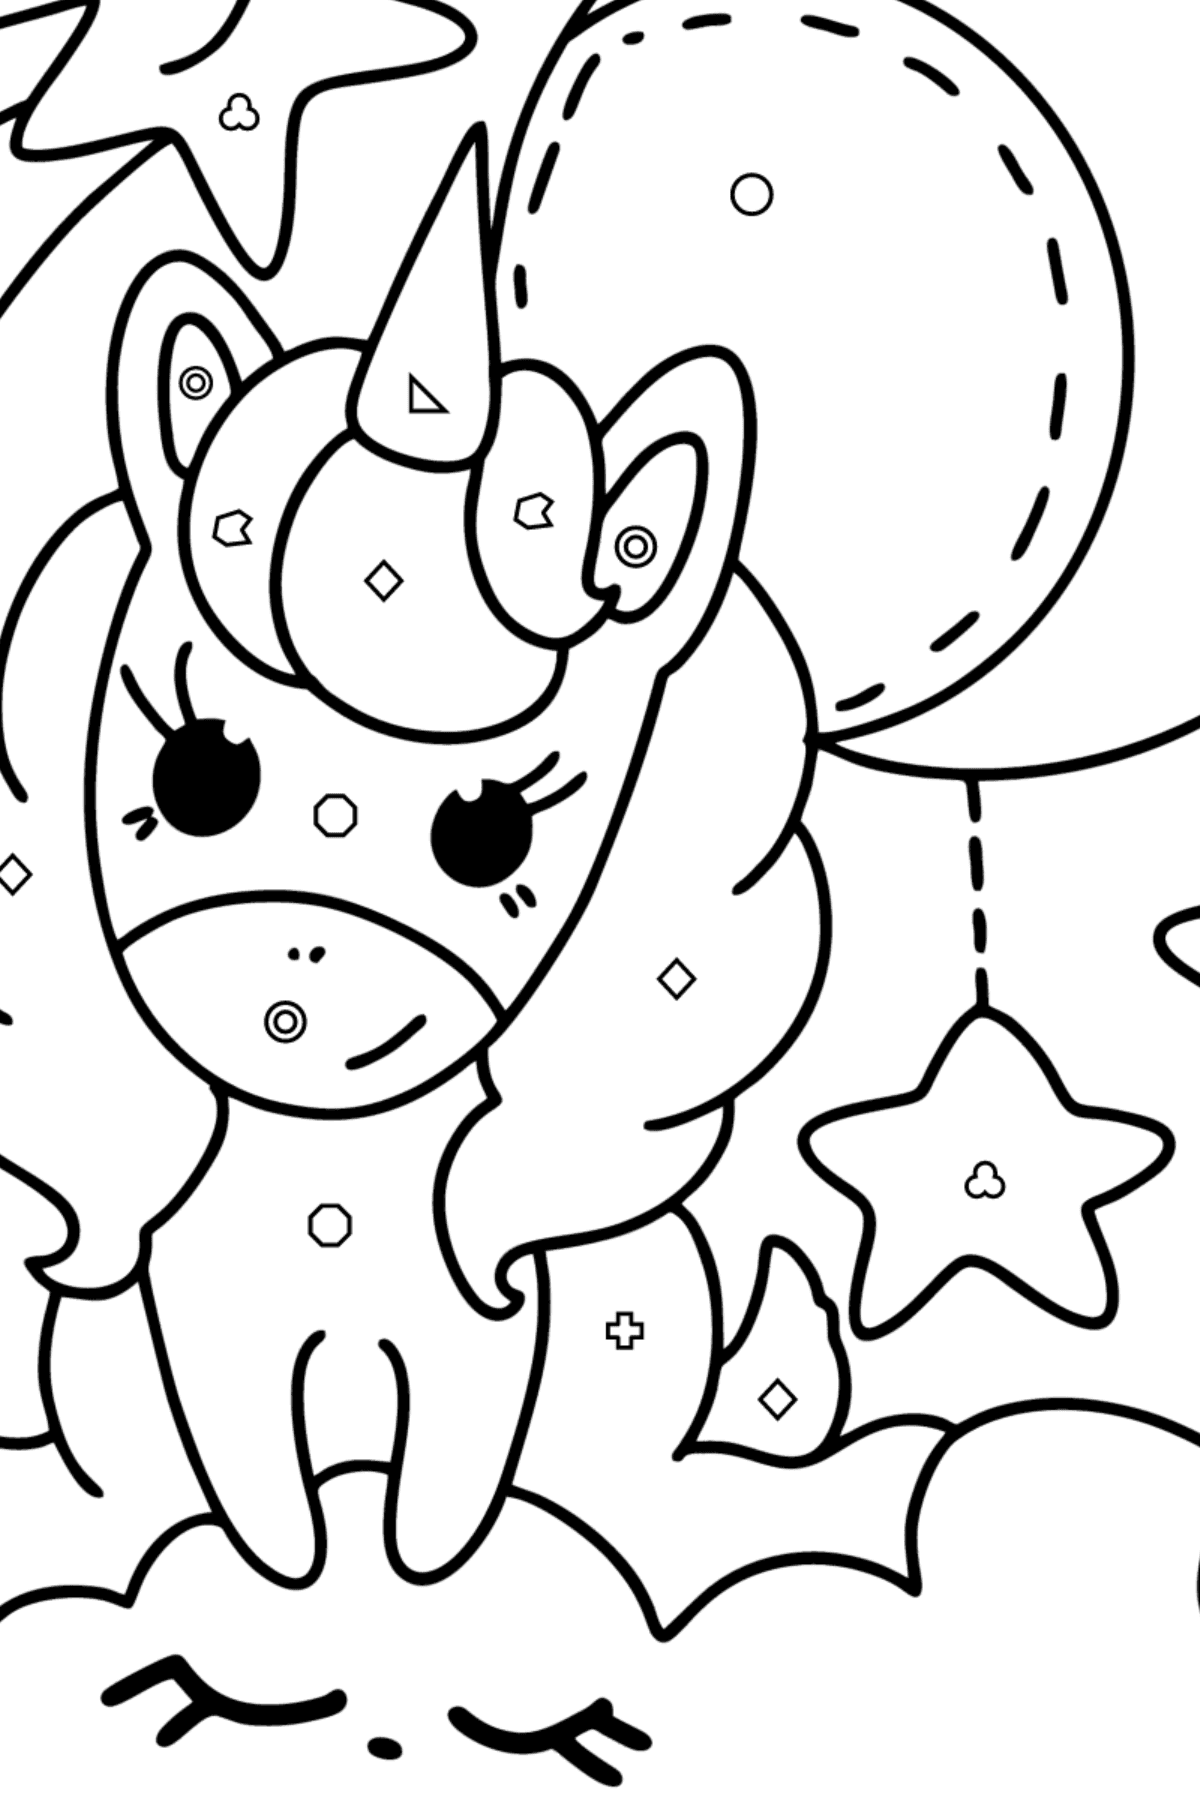 Moon unicorn coloring page - Coloring by Geometric Shapes for Kids